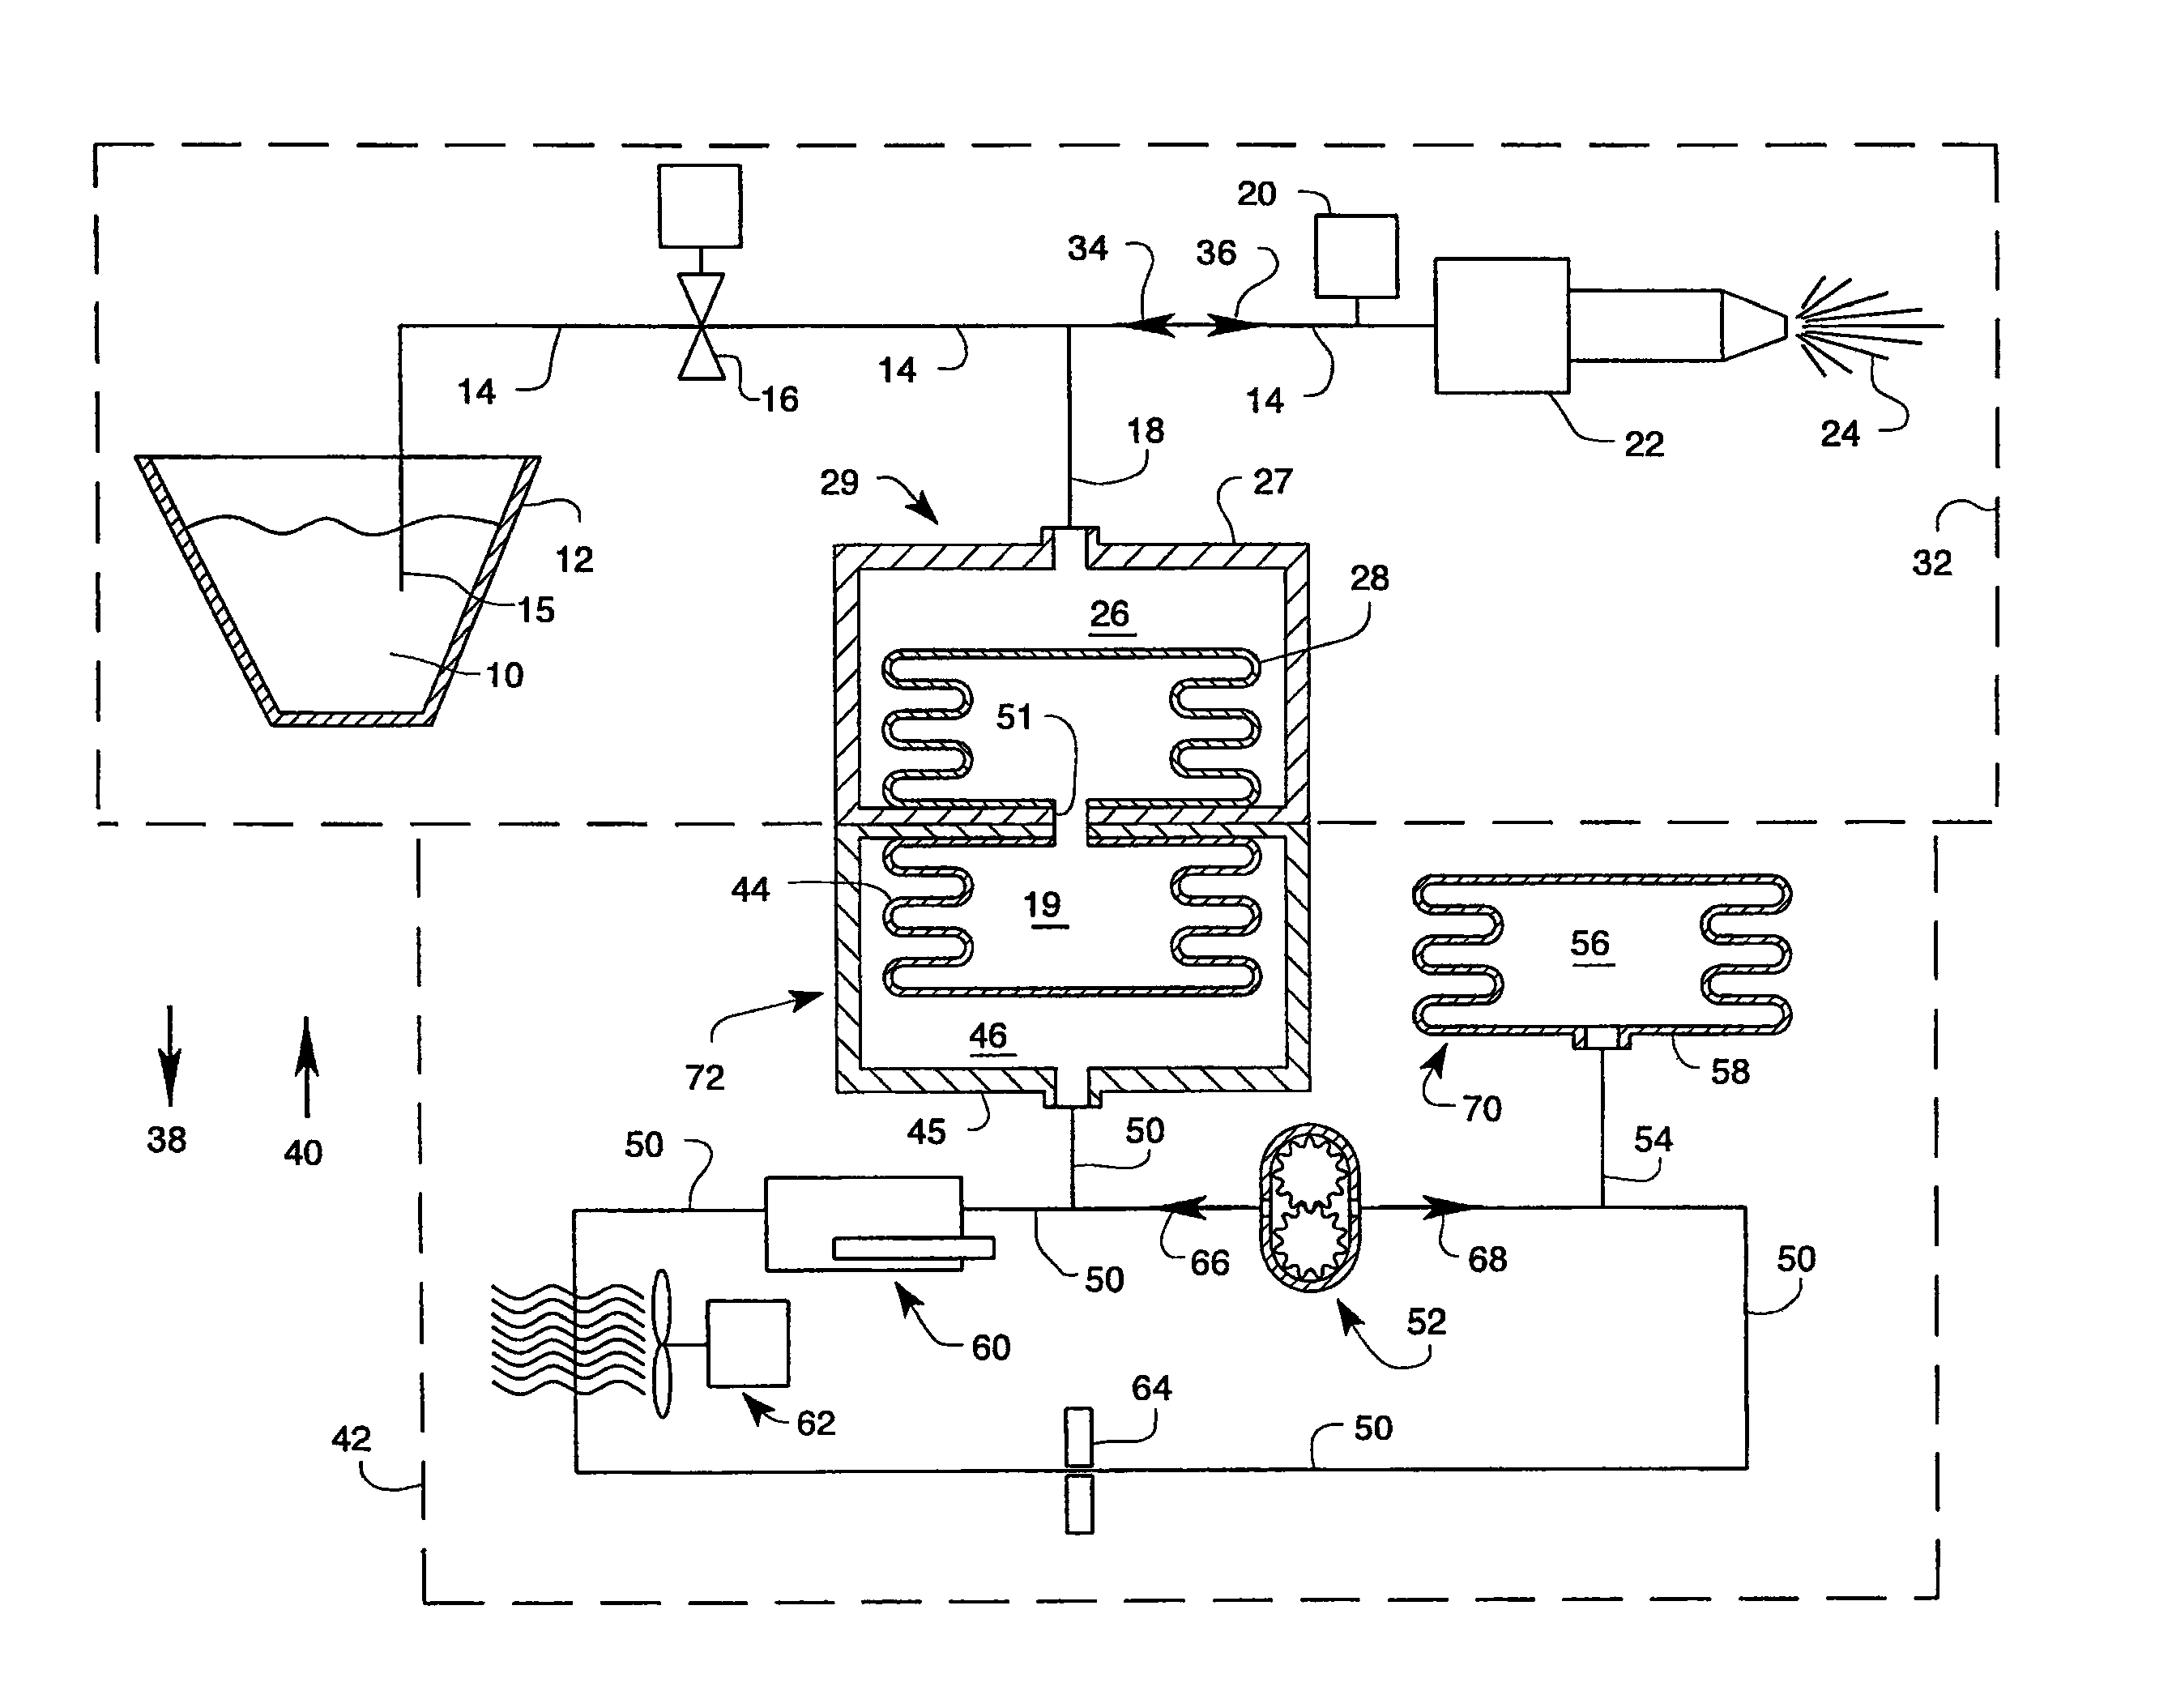 Fluid dispensing system with thermal control